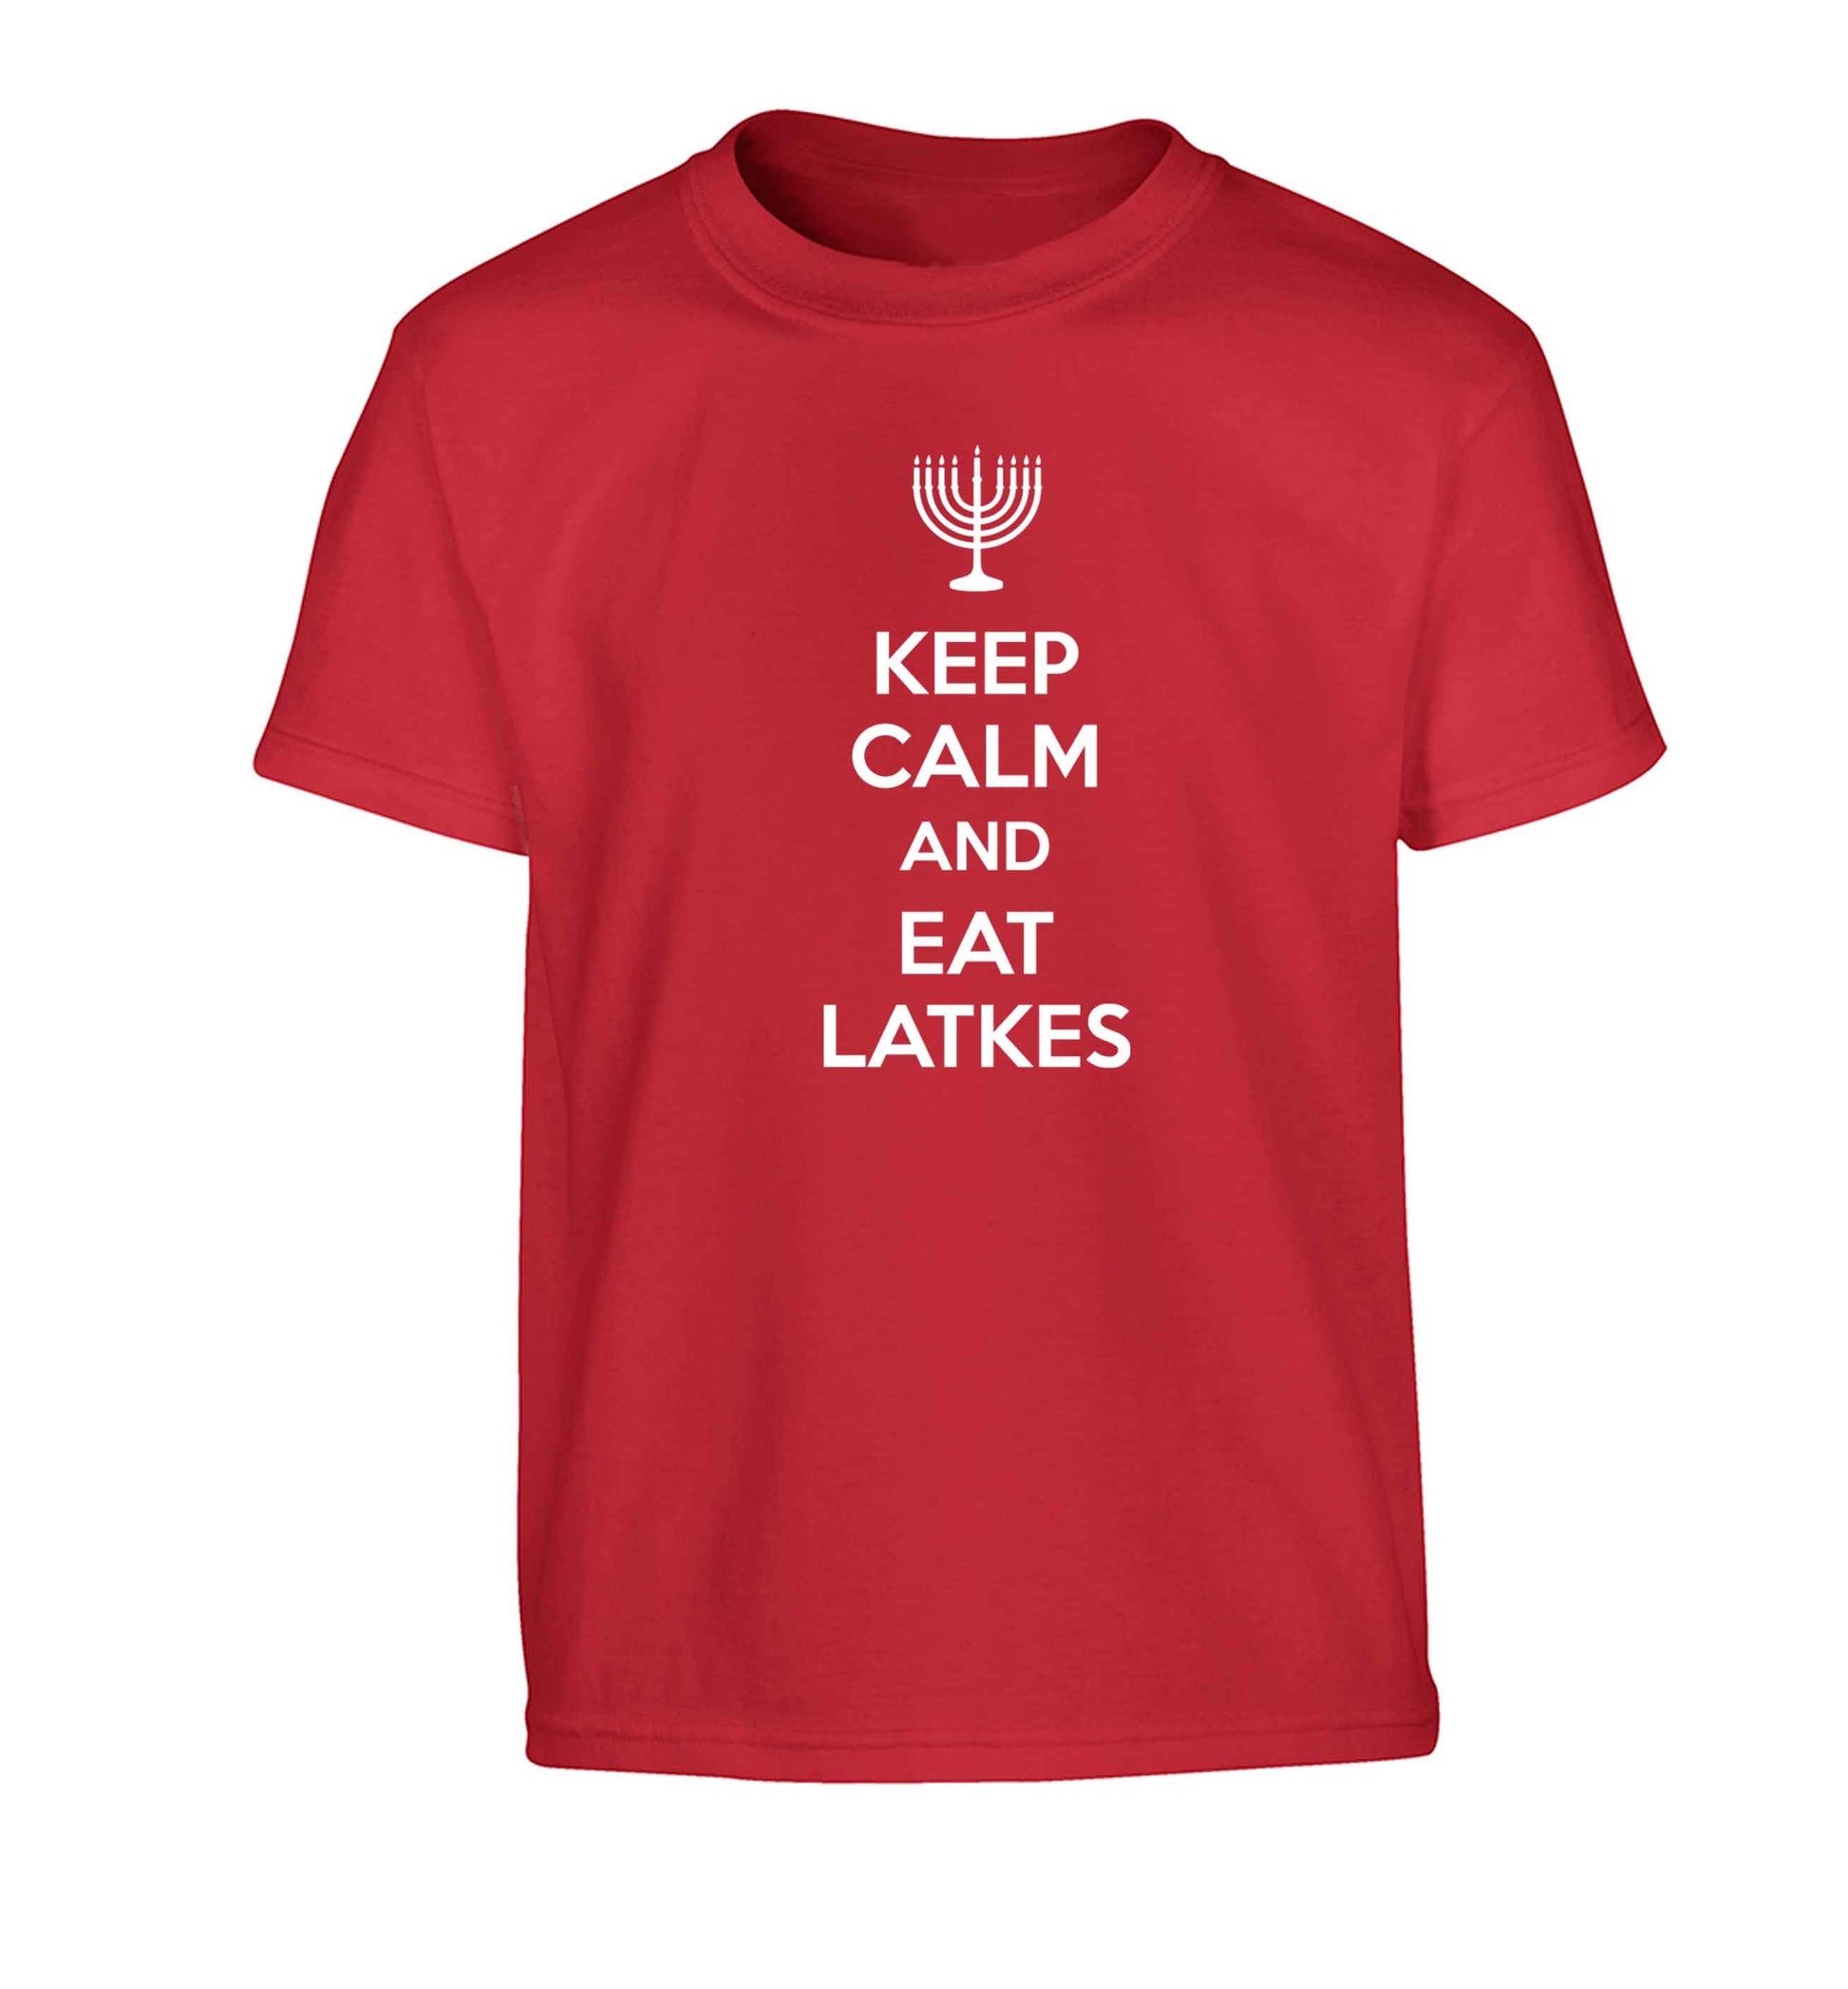 Keep calm and eat latkes Children's red Tshirt 12-13 Years